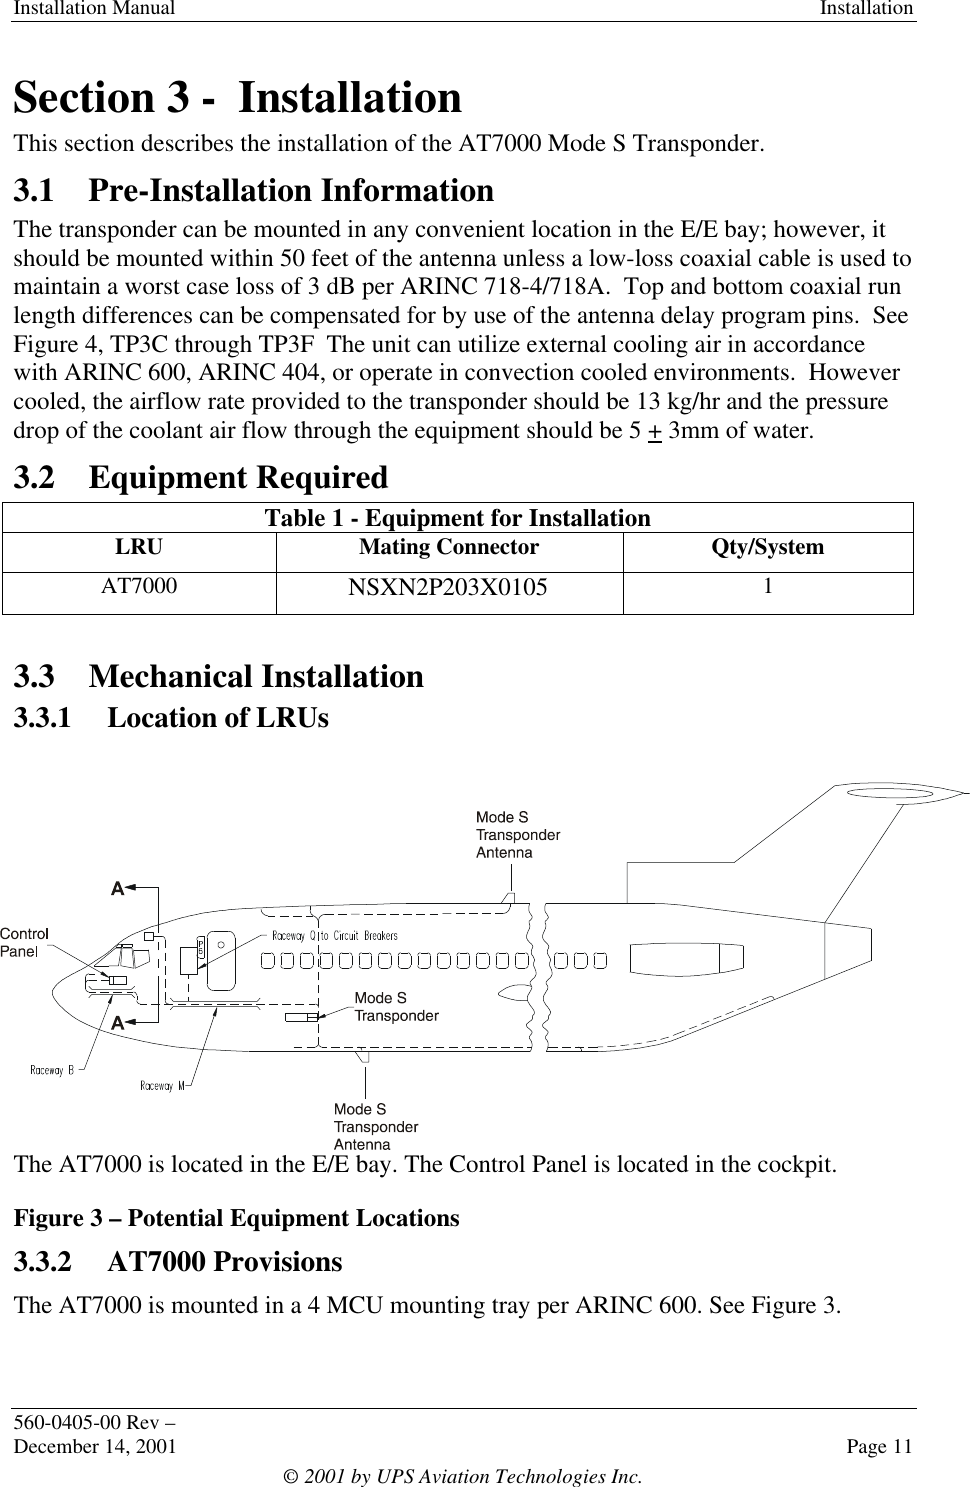 Installation Manual Installation560-0405-00 Rev –December 14, 2001 Page 11© 2001 by UPS Aviation Technologies Inc.Section 3 -  InstallationThis section describes the installation of the AT7000 Mode S Transponder.3.1 Pre-Installation InformationThe transponder can be mounted in any convenient location in the E/E bay; however, itshould be mounted within 50 feet of the antenna unless a low-loss coaxial cable is used tomaintain a worst case loss of 3 dB per ARINC 718-4/718A.  Top and bottom coaxial runlength differences can be compensated for by use of the antenna delay program pins.  SeeFigure 4, TP3C through TP3F  The unit can utilize external cooling air in accordancewith ARINC 600, ARINC 404, or operate in convection cooled environments.  Howevercooled, the airflow rate provided to the transponder should be 13 kg/hr and the pressuredrop of the coolant air flow through the equipment should be 5 + 3mm of water.3.2 Equipment RequiredTable 1 - Equipment for InstallationLRU Mating Connector Qty/SystemAT7000 NSXN2P203X0105 13.3 Mechanical Installation3.3.1 Location of LRUsThe AT7000 is located in the E/E bay. The Control Panel is located in the cockpit.Figure 3 – Potential Equipment Locations3.3.2 AT7000 ProvisionsThe AT7000 is mounted in a 4 MCU mounting tray per ARINC 600. See Figure 3.